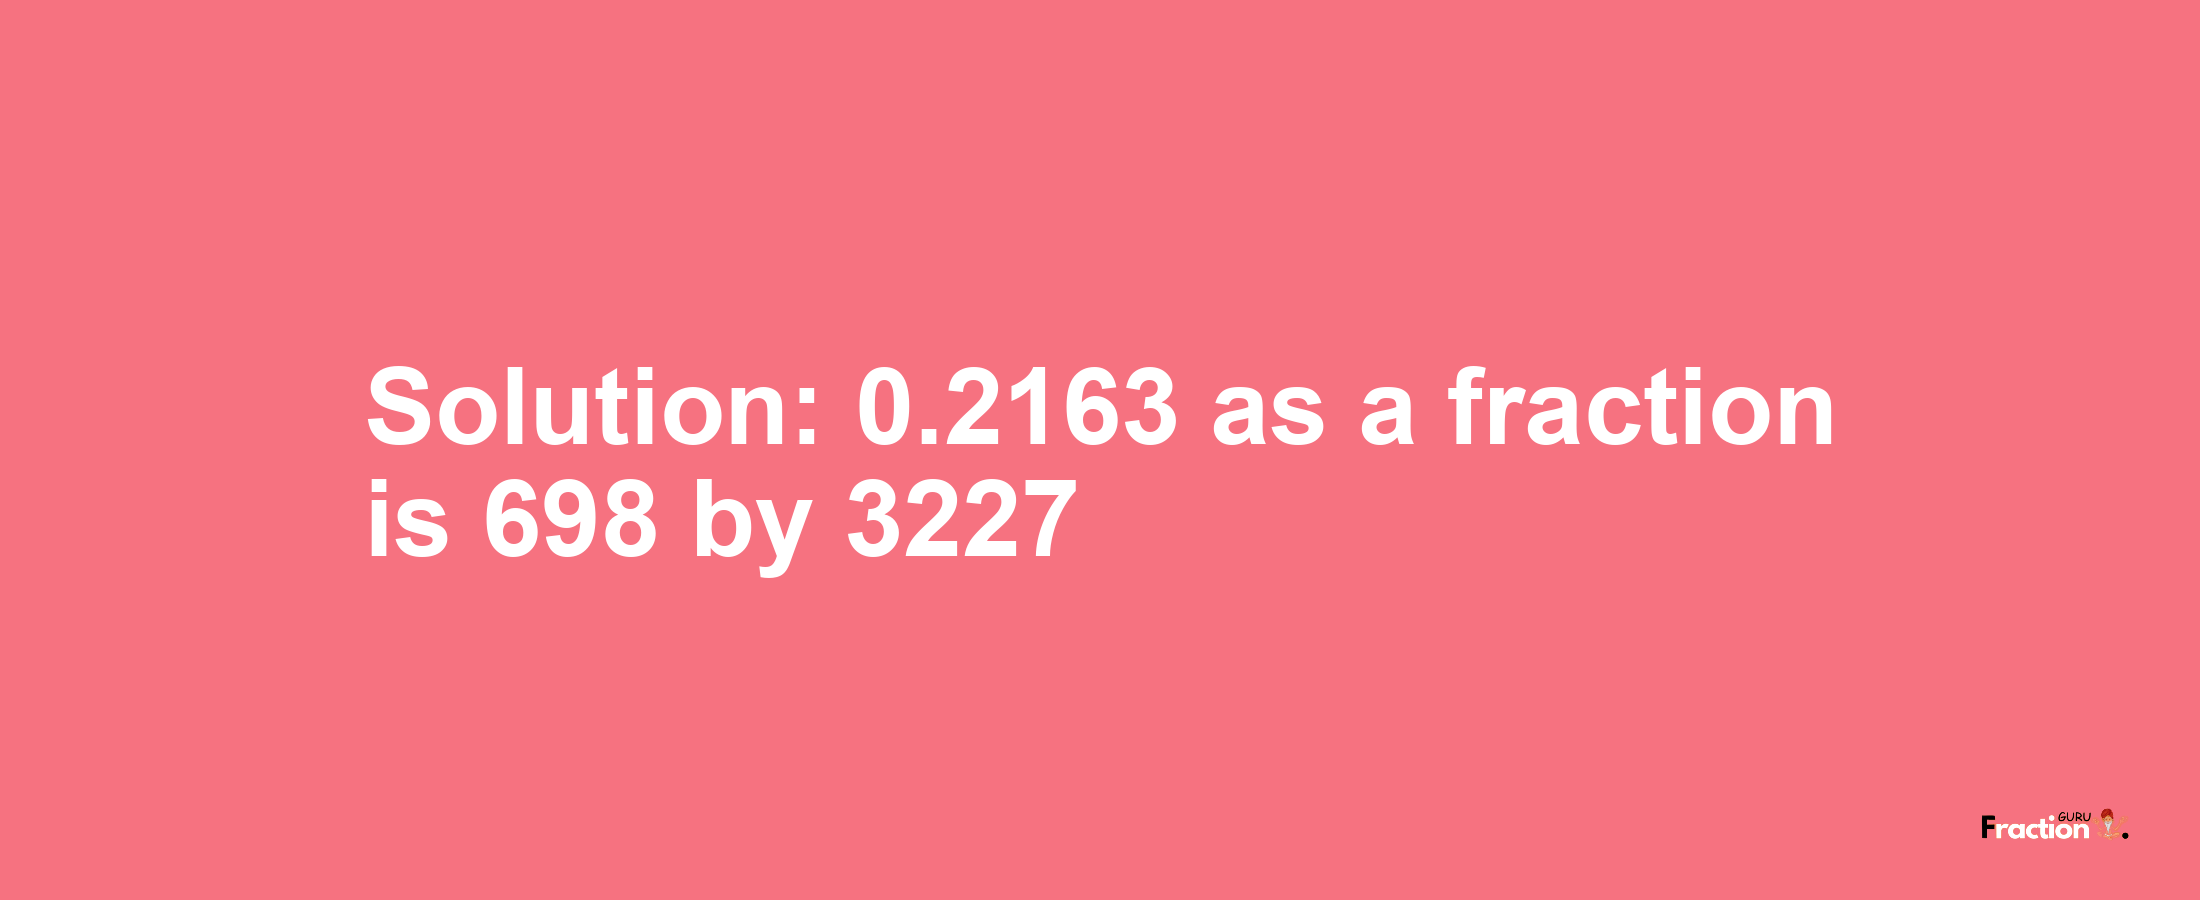 Solution:0.2163 as a fraction is 698/3227